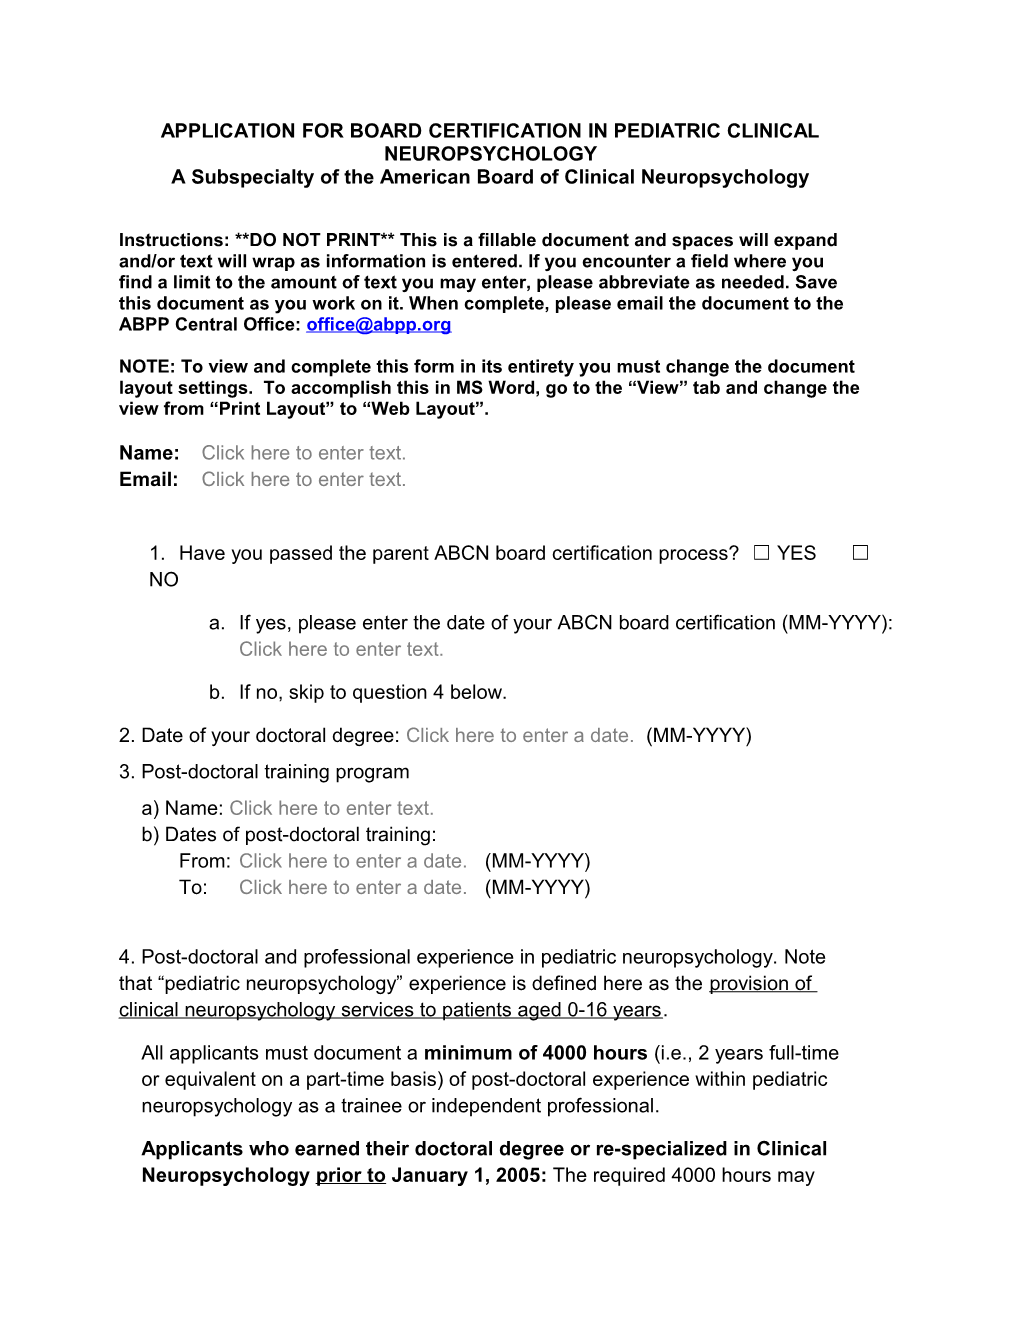 Application for Board Certification in Pediatric Clinical Neuropsychology